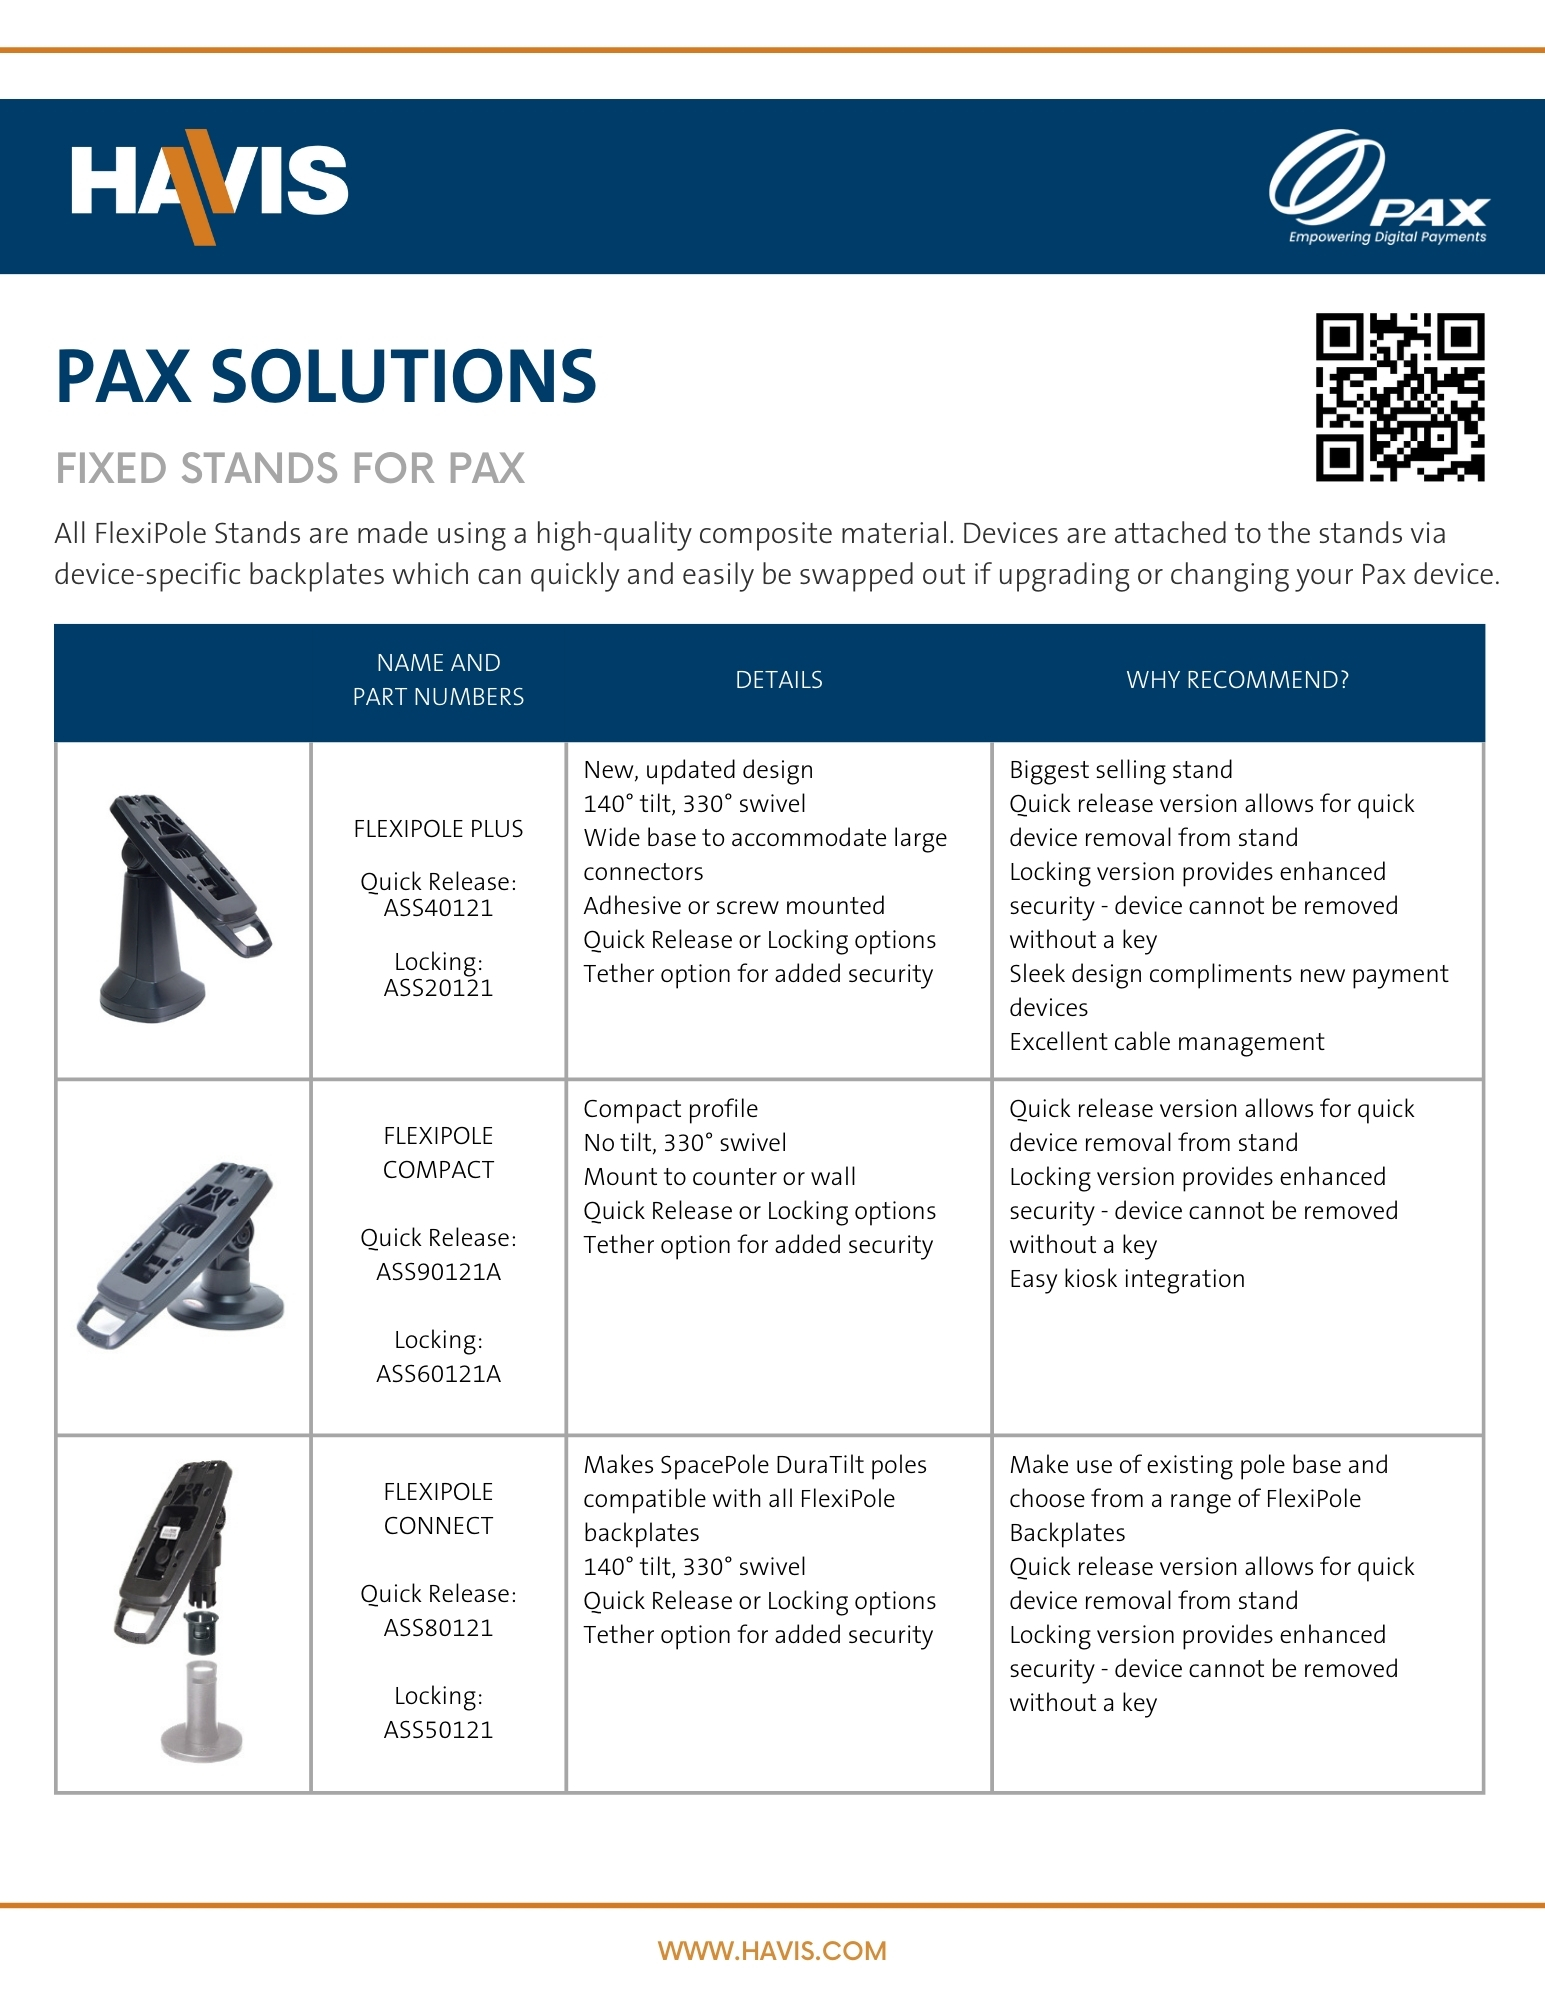 Havis Solutions for Pax (Quick Reference Guide)